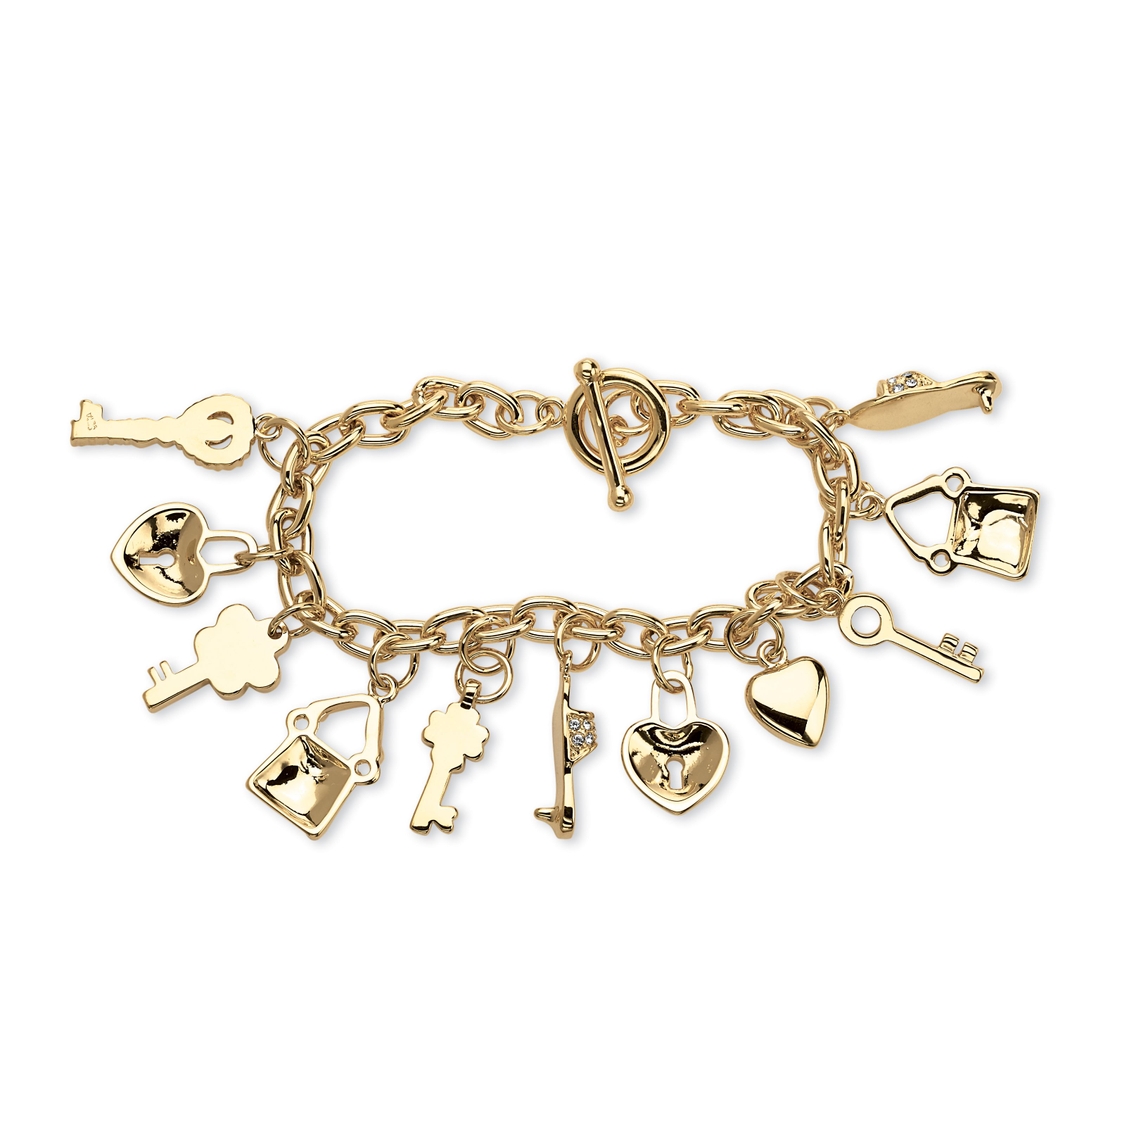 PalmBeach Crystal Yellow Gold-Plated Shoe, Purse, Heart Lock and Key Charm Bracelet - Image 2 of 4